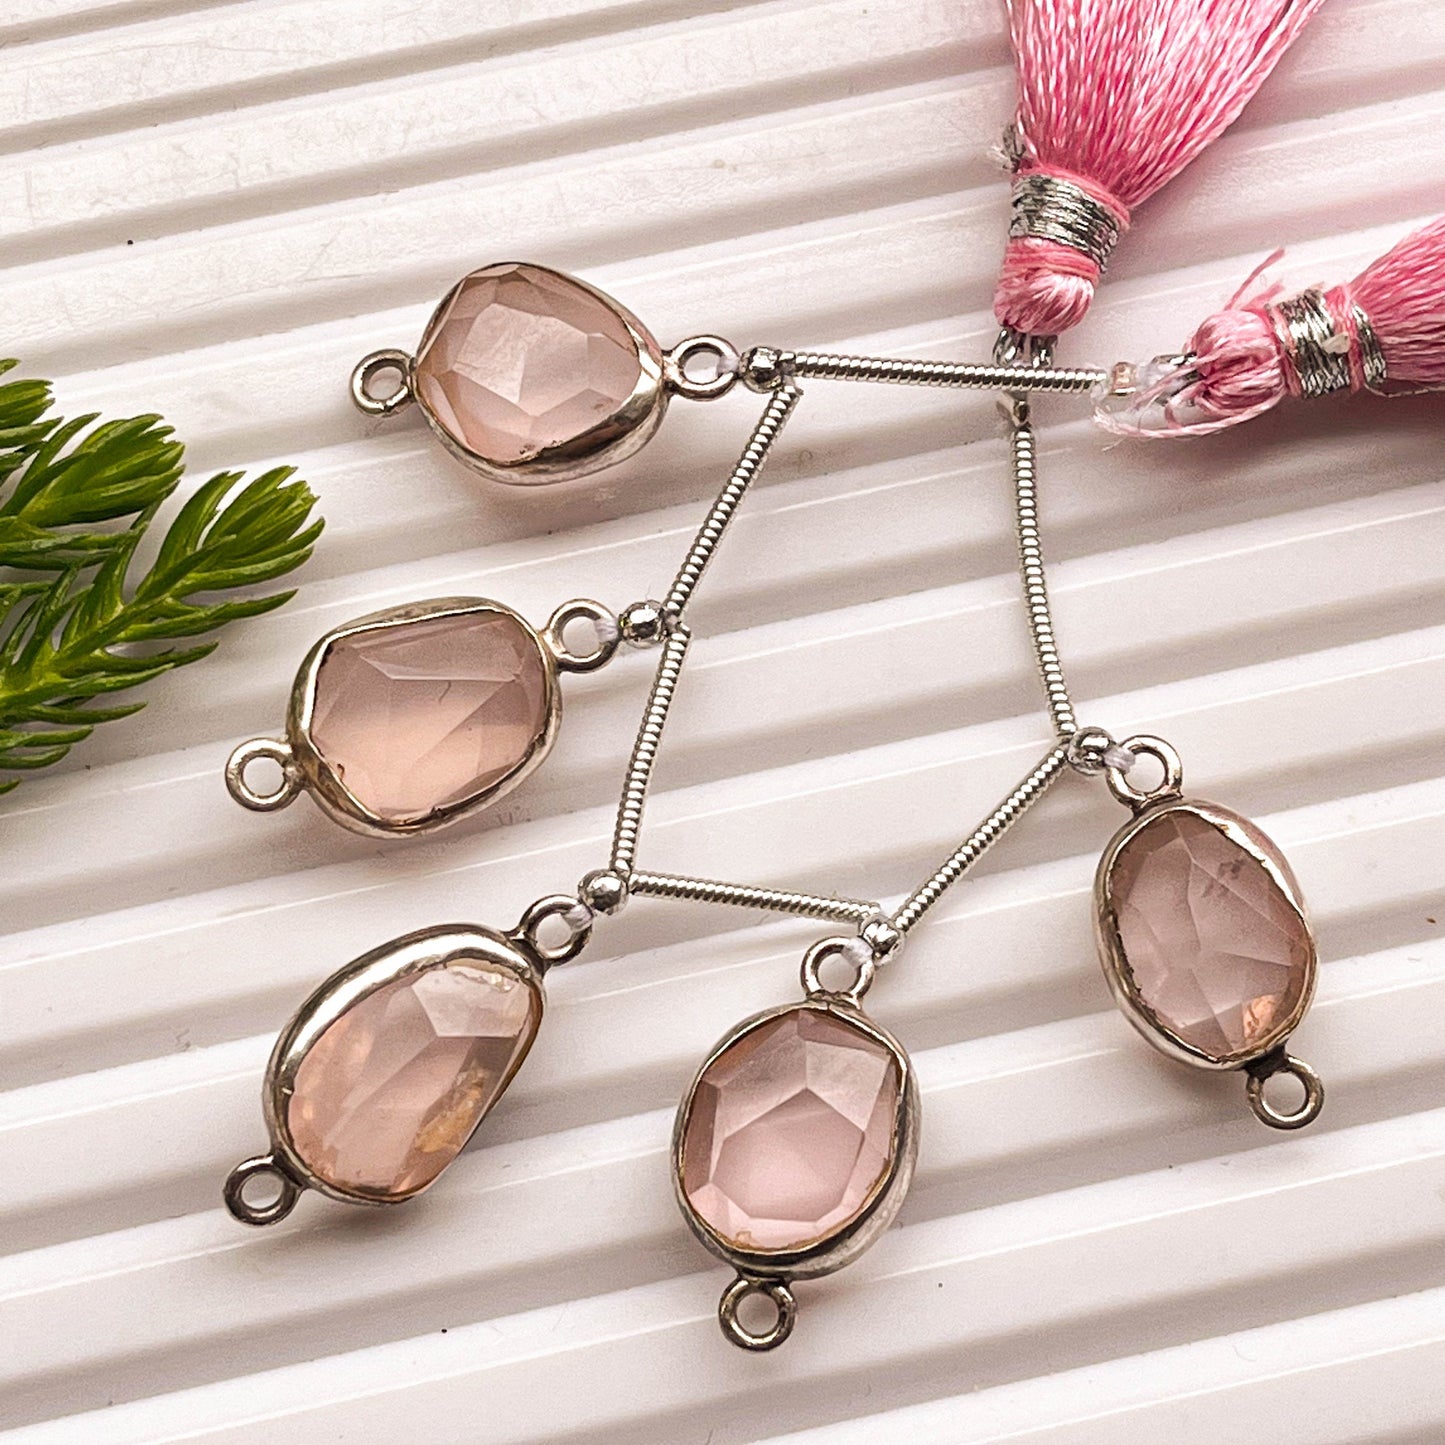 5 Pieces Rose Quartz uneven faceted tumble 925 Silver bezel set Connectors for Jewelry making Beadsforyourjewelry